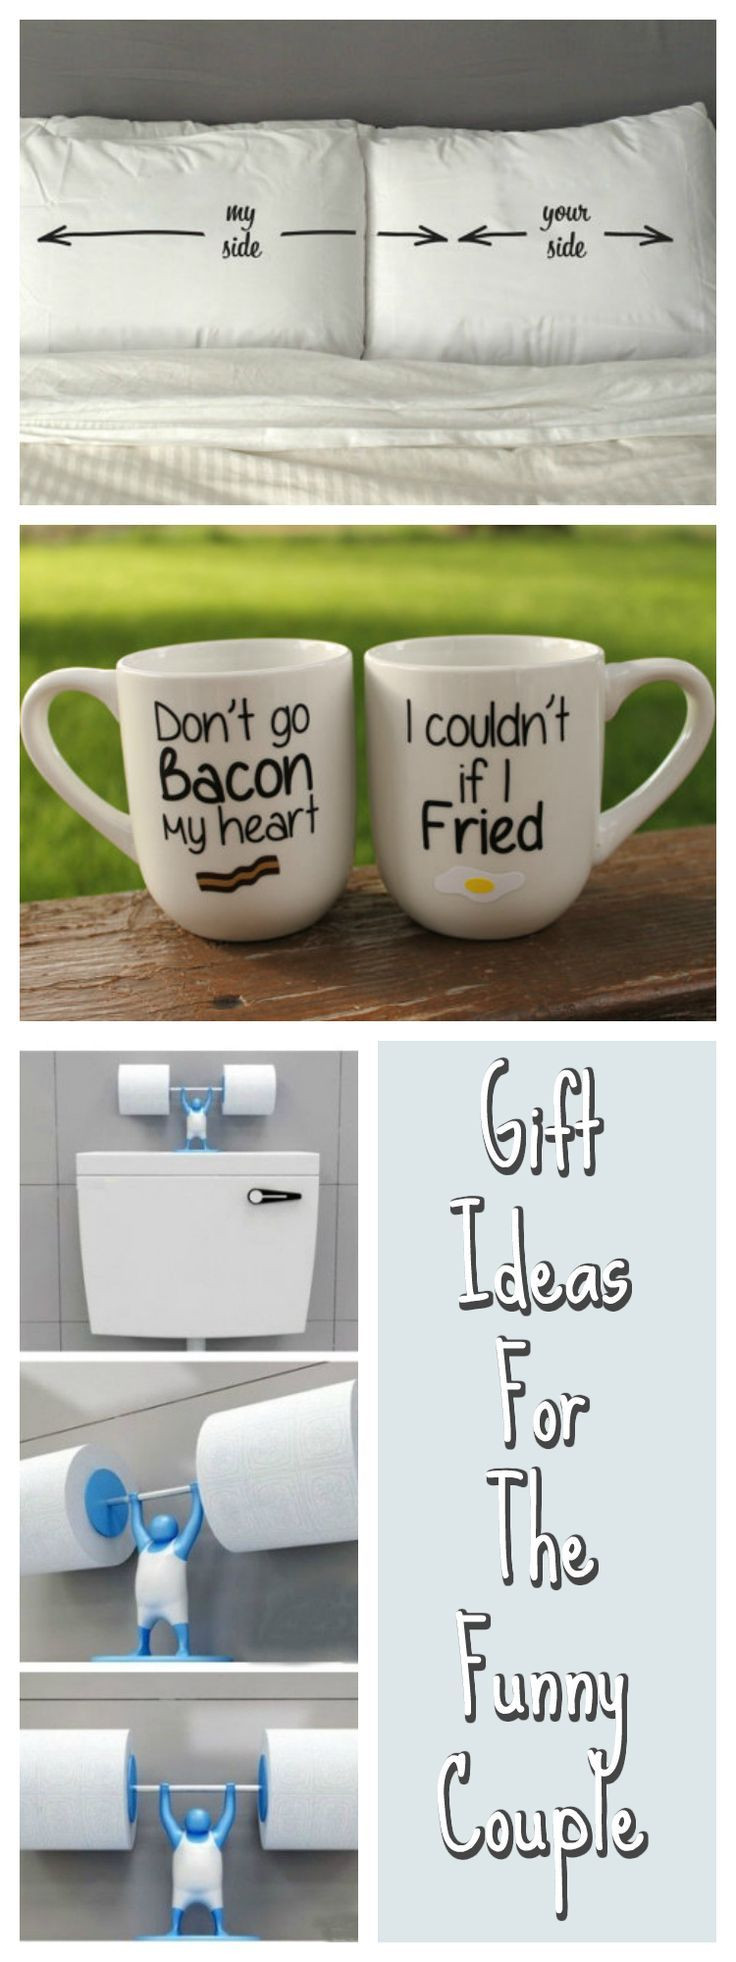 Funny Gift Ideas For Boyfriends
 Humorous t ideas for spouses that like to laugh These